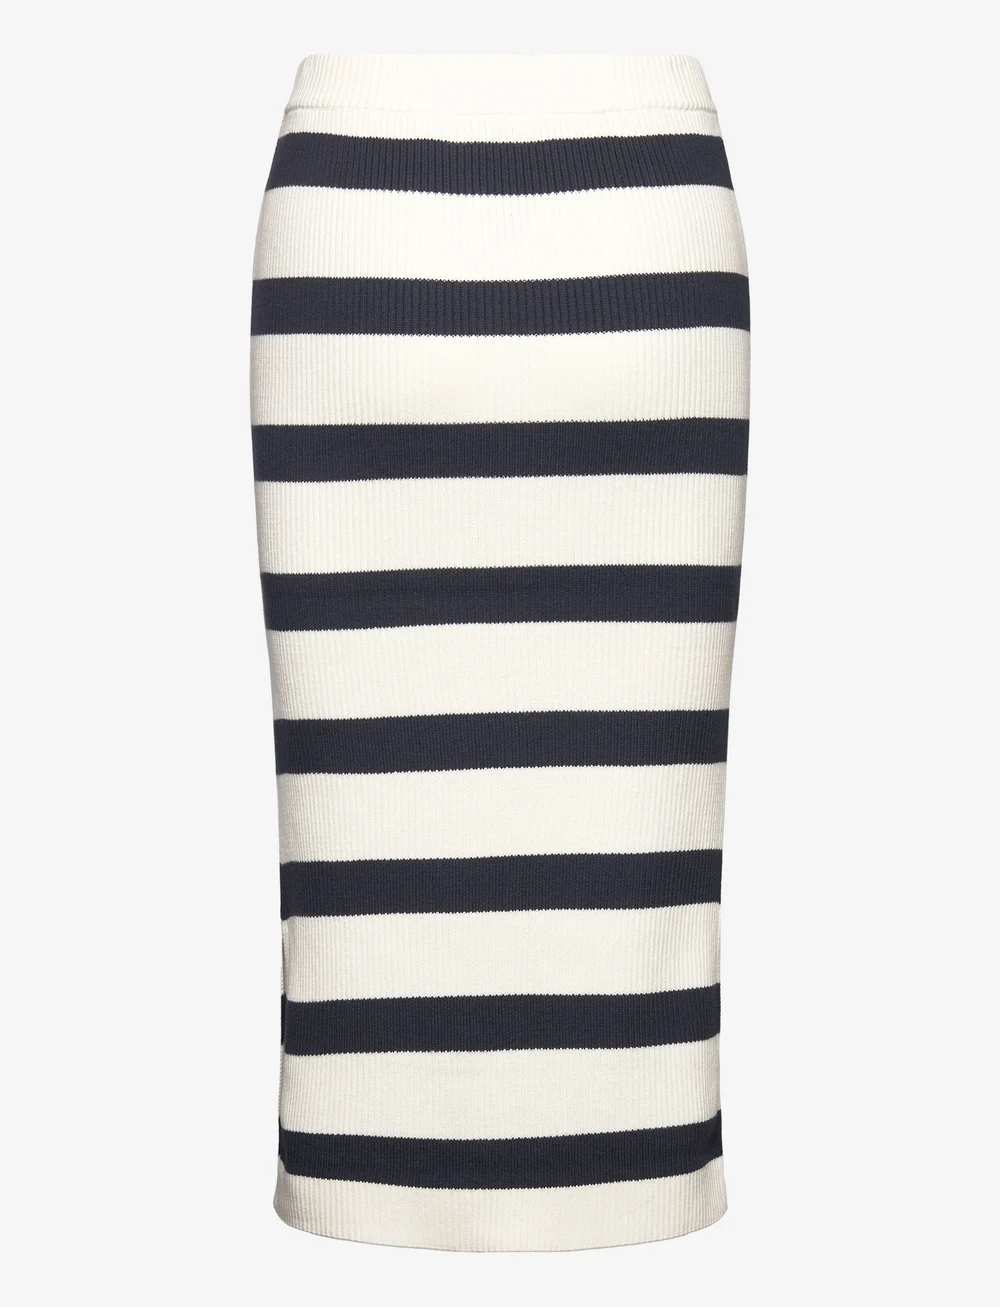 Esprit Casual Skirts Flat Knitted - Midi skirts